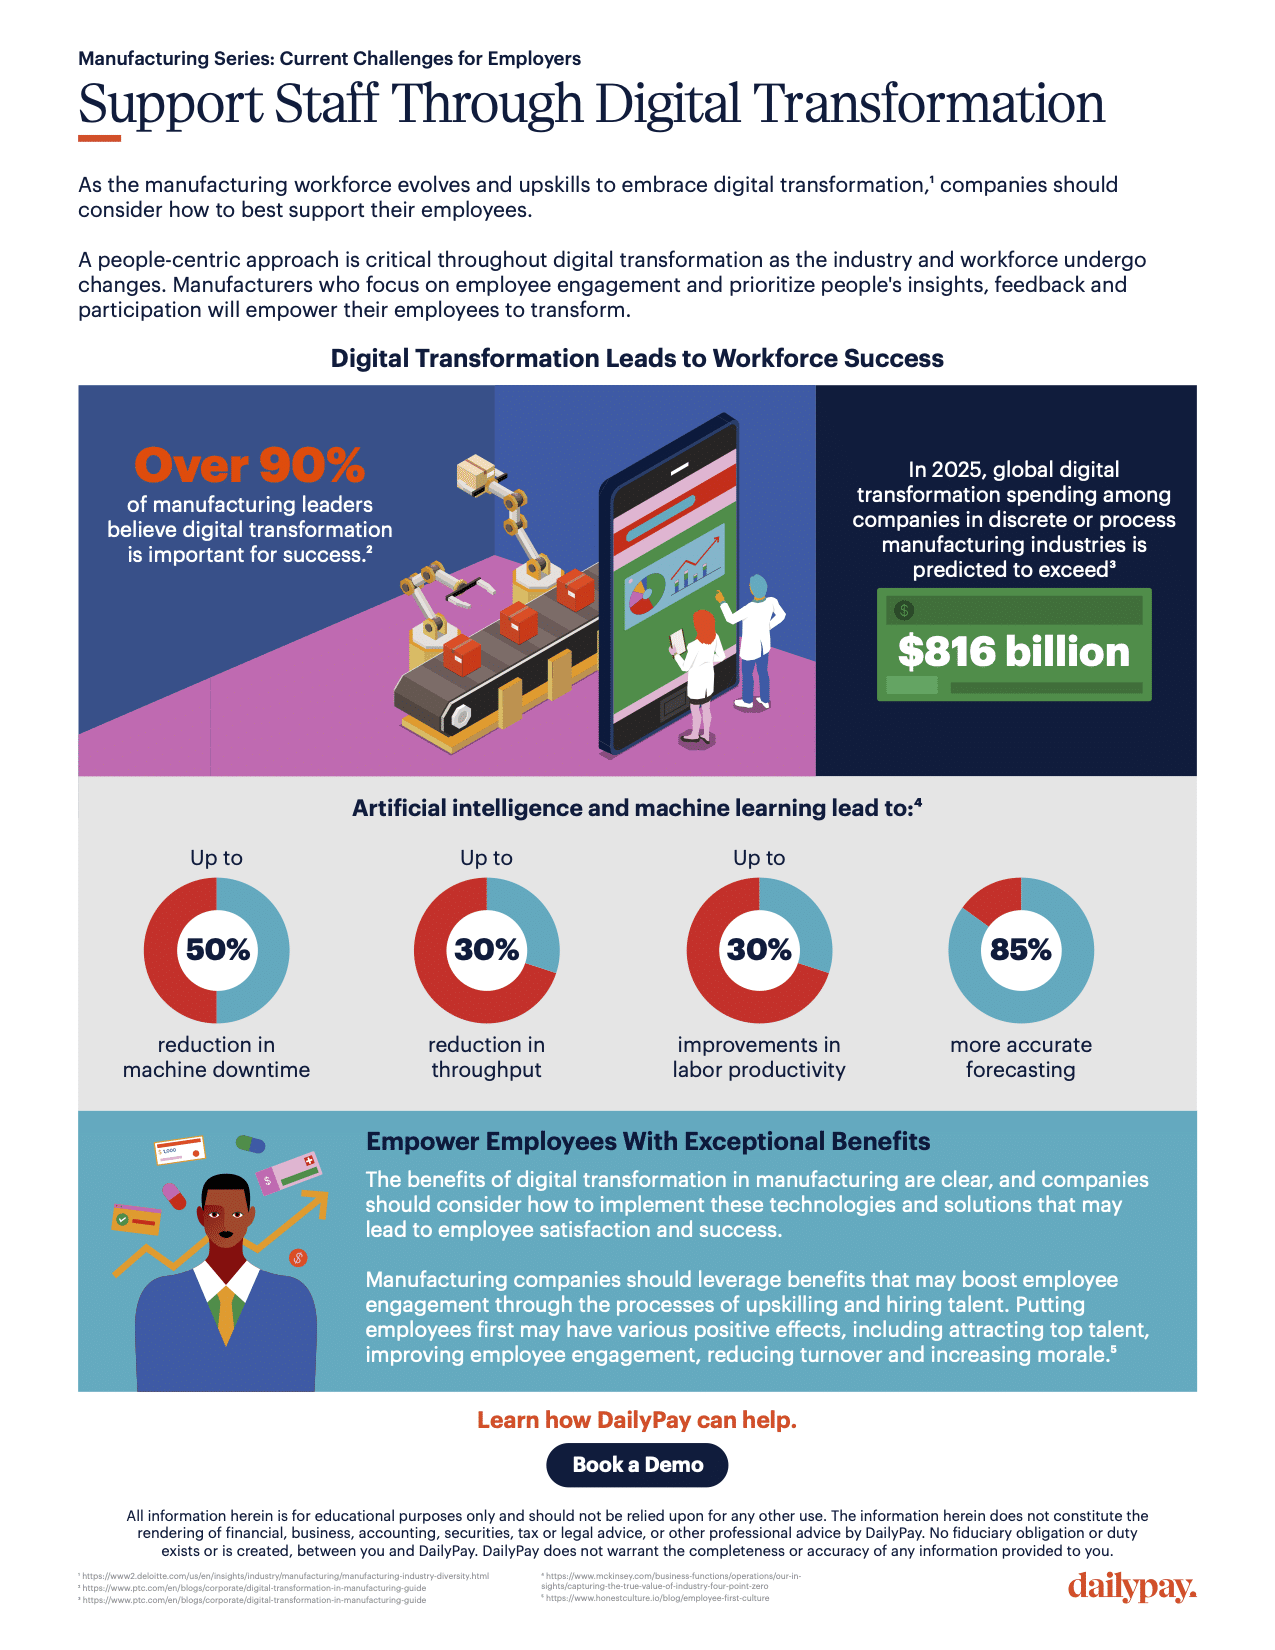 Infographic titled "Support Staff Through Digital Transformation." Highlights include a statistic noting over 90% of manufacturing executives believe digital transformation is important to success. Three key stats: 10-30% productivity improvement, up to 30% labor cost reduction, and 85% forecasting accuracy. A quote describes the efficiency of digital transformation. Artificial intelligence and machine learning are emphasized, with sizable benefits in workforce support. At the bottom, there's a CTA to learn more about DailyPay.